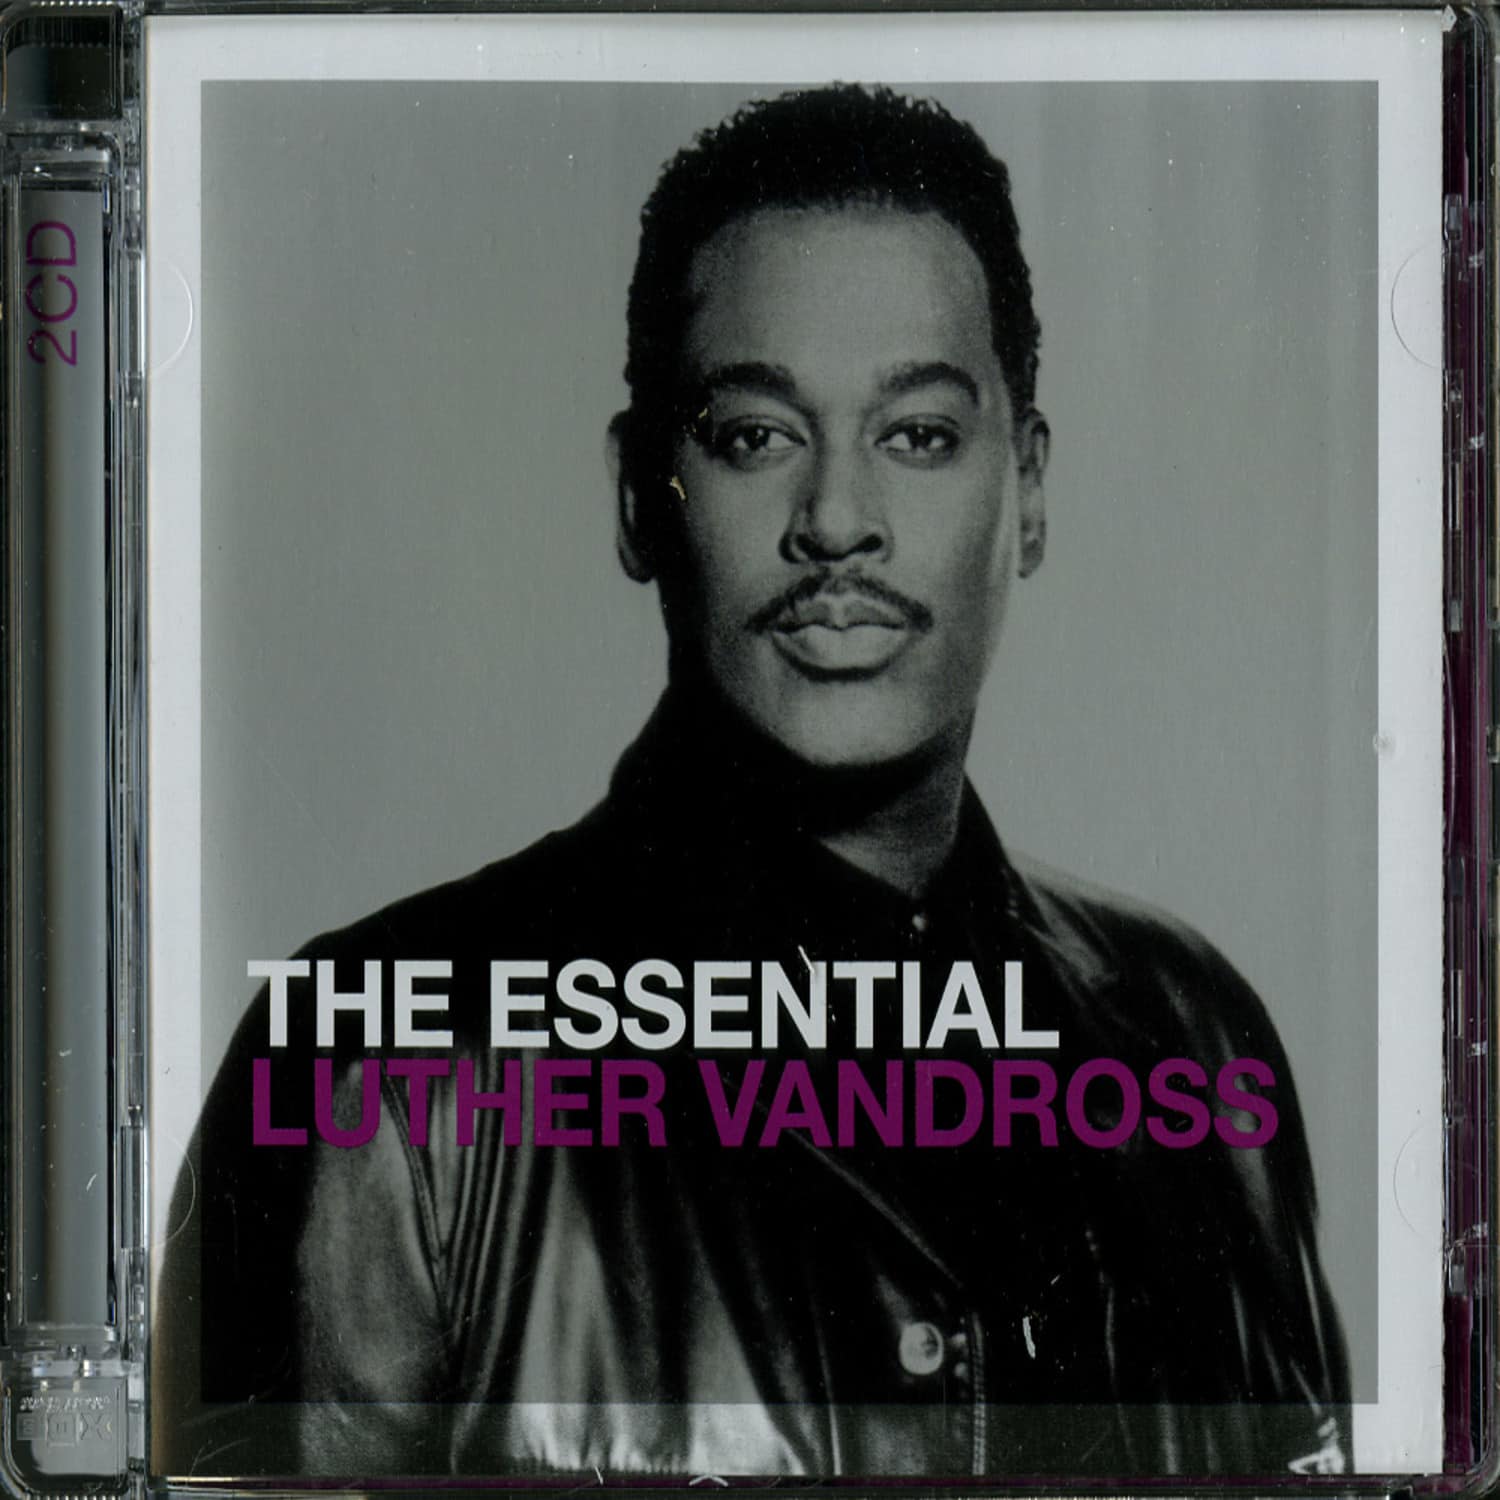 song list luther vandross